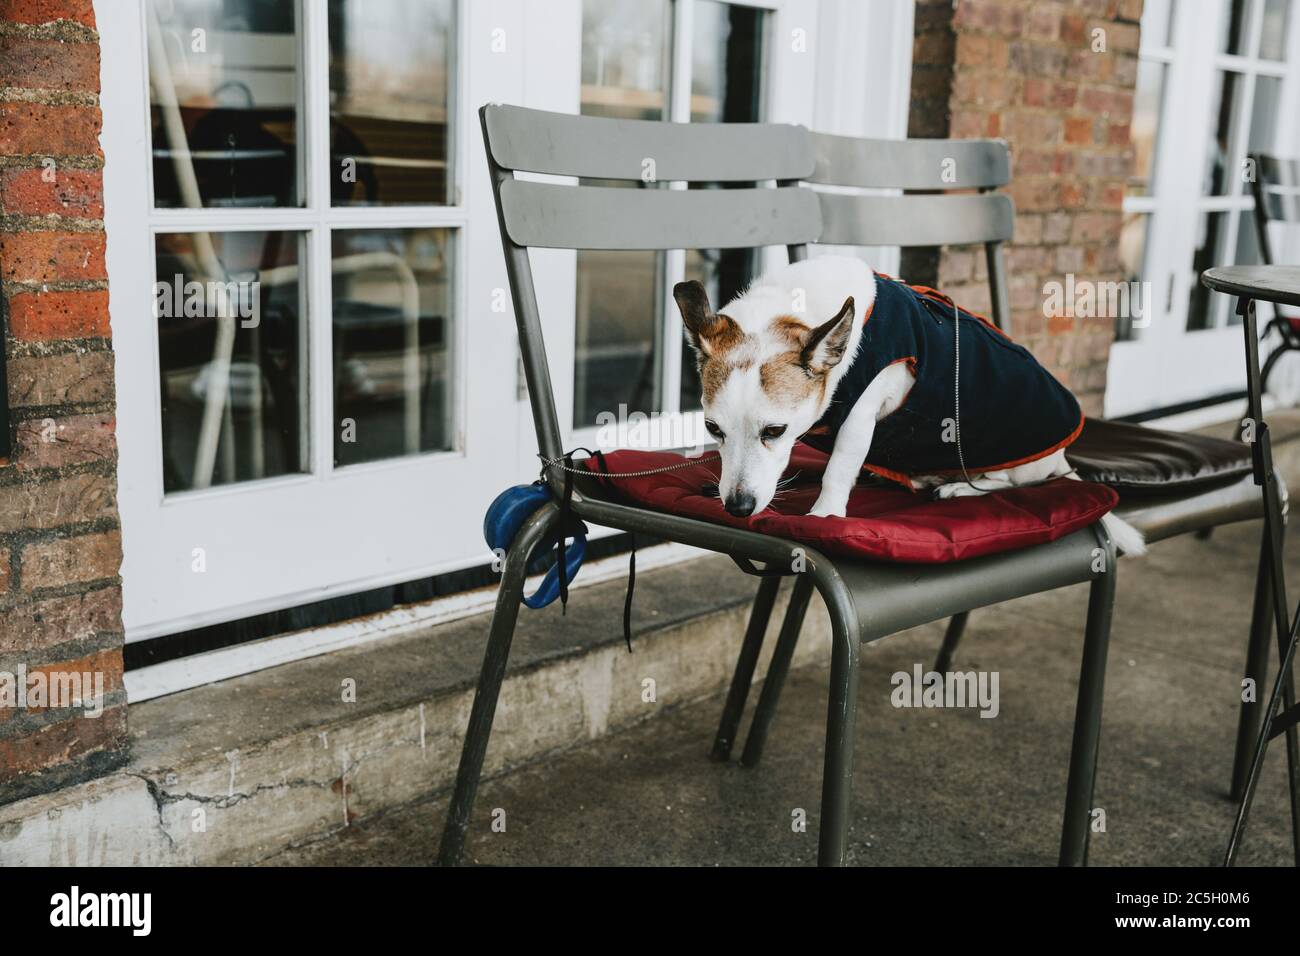 Tethered lonely white dog with clothes sitting and waiting on the red blanket on the metal chair during the winter morning Stock Photo